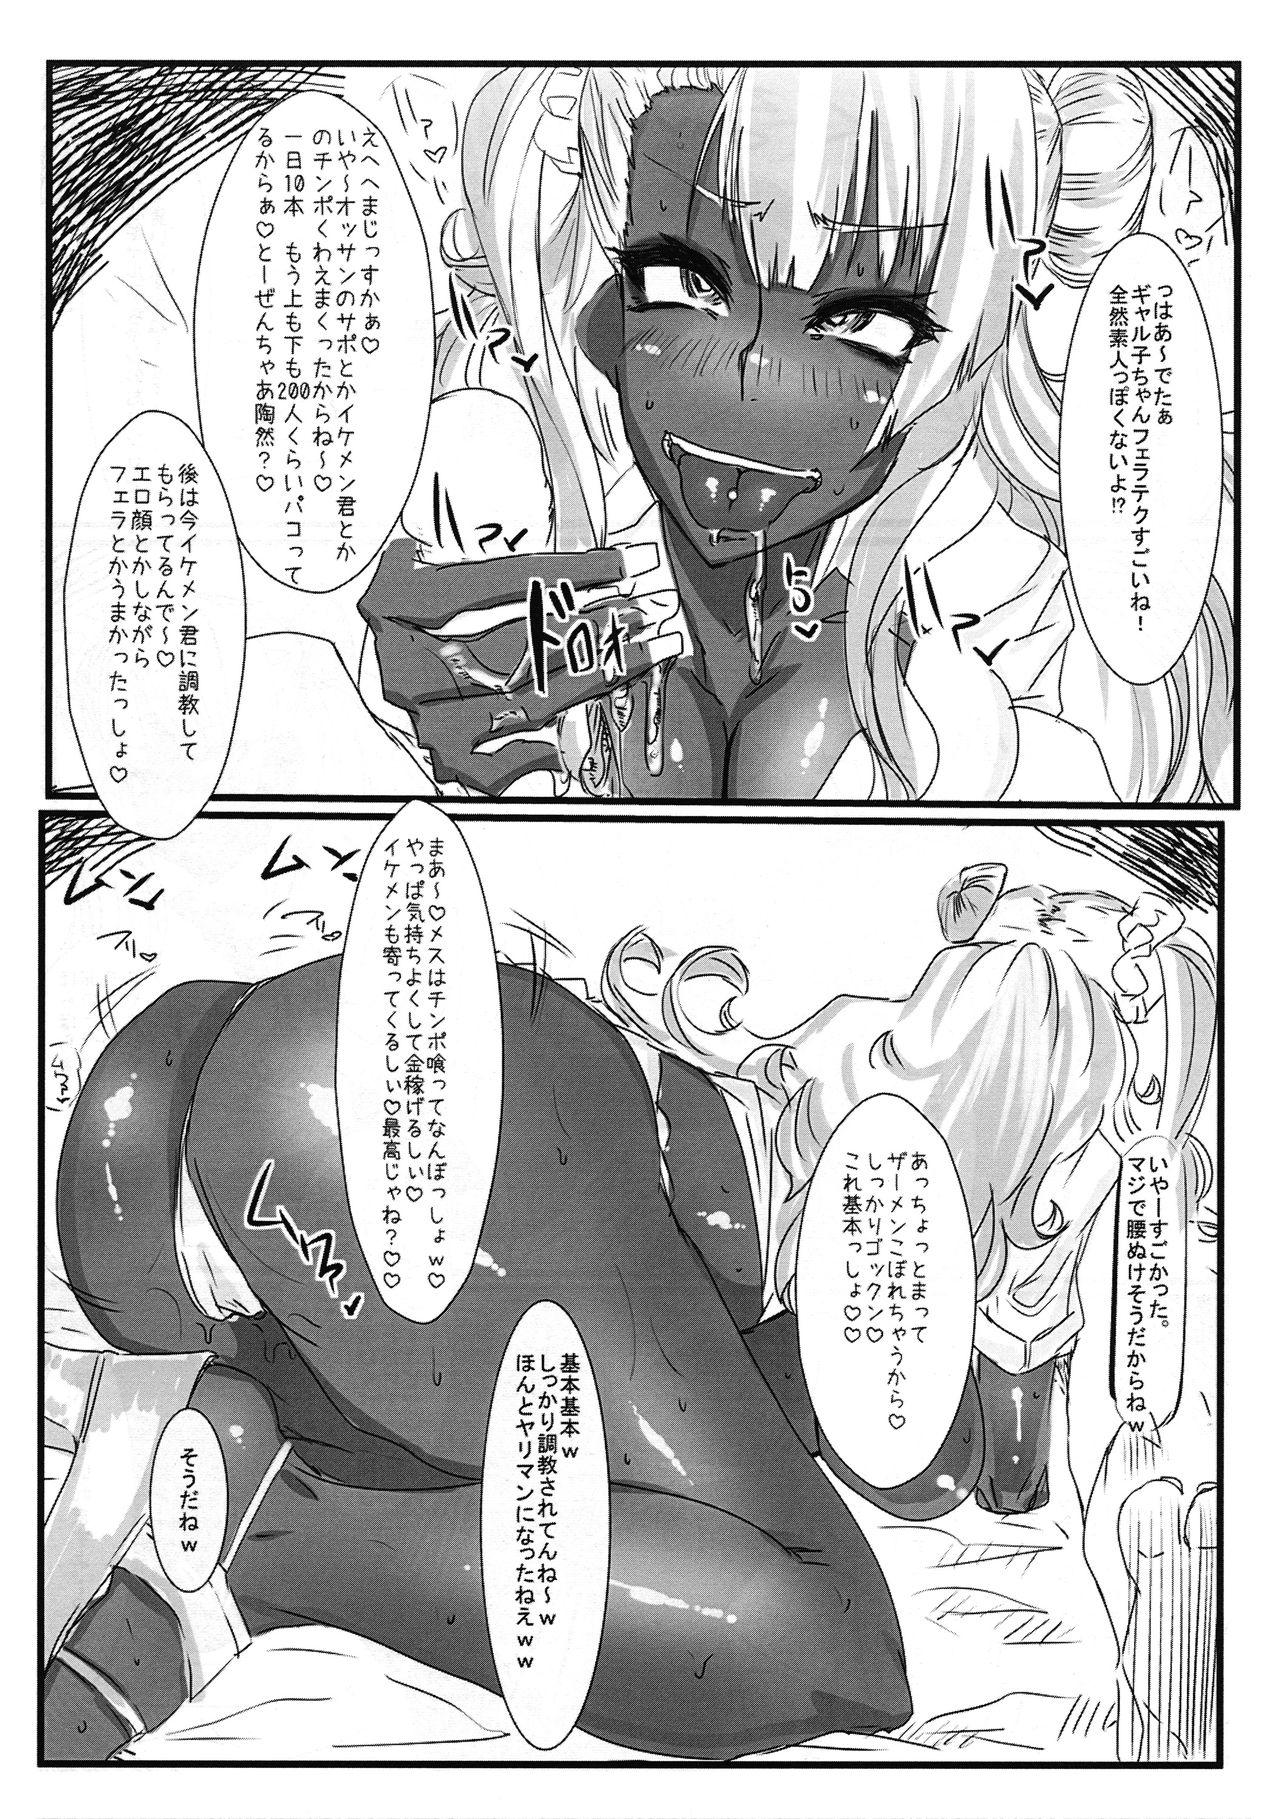 Couple Fucking PROSTITUTE² +VER3.0 - Oshiete galko-chan Insertion - Page 6